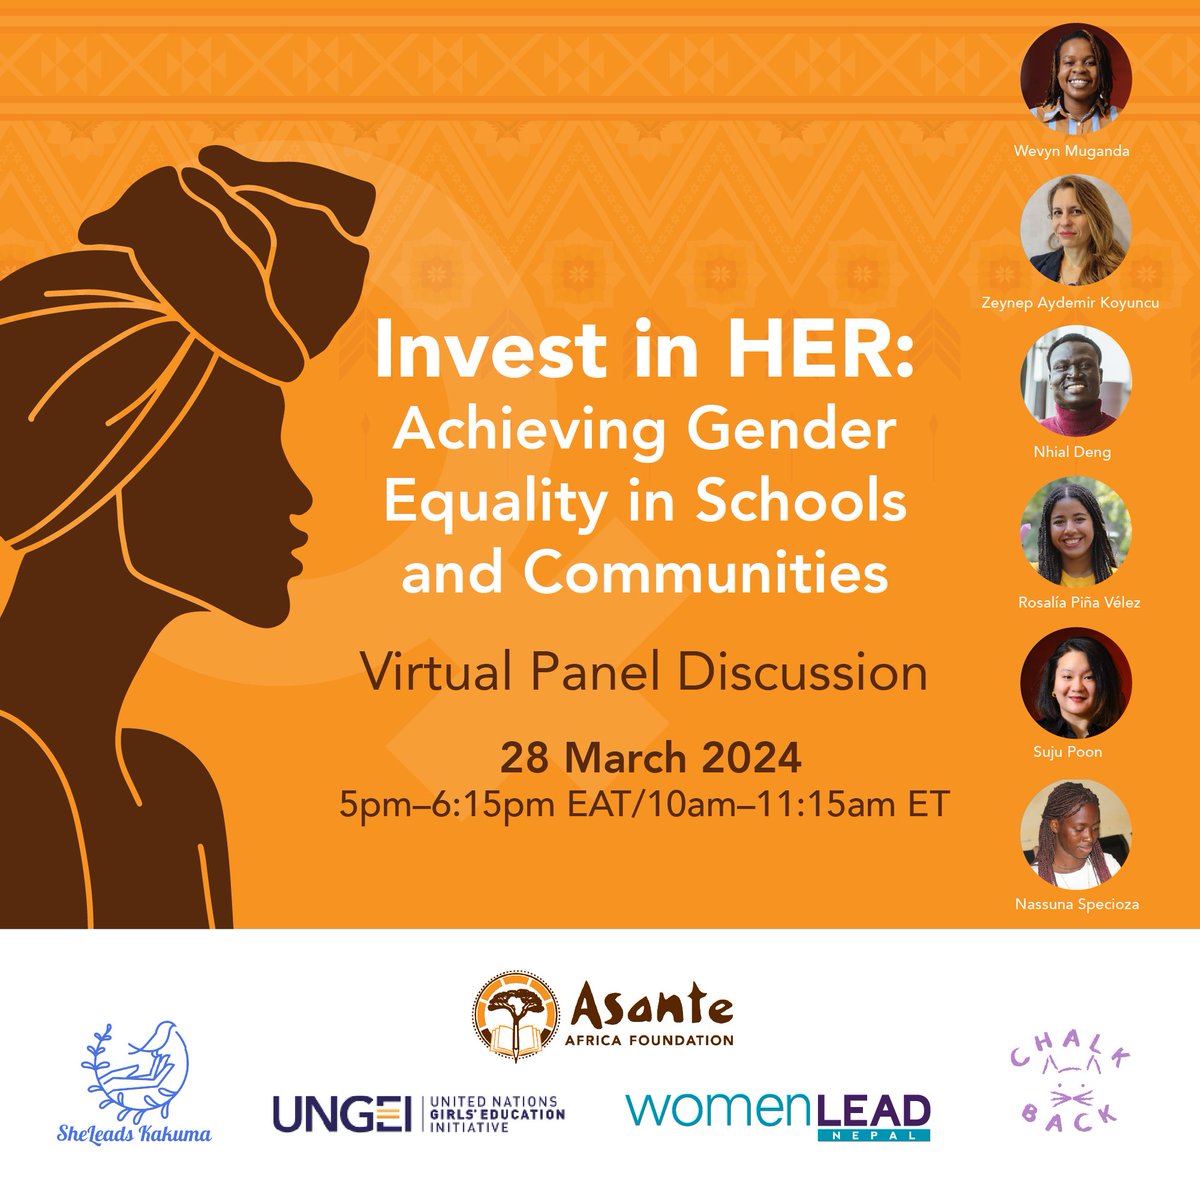 Join us on March 28 for our virtual panel discussion ‘Invest in HER: Achieving Gender Equality in Schools and Communities’ to embark on a journey that will transform gender norms. Register for FREE via zoom.us/webinar/regist… #AAFempowers